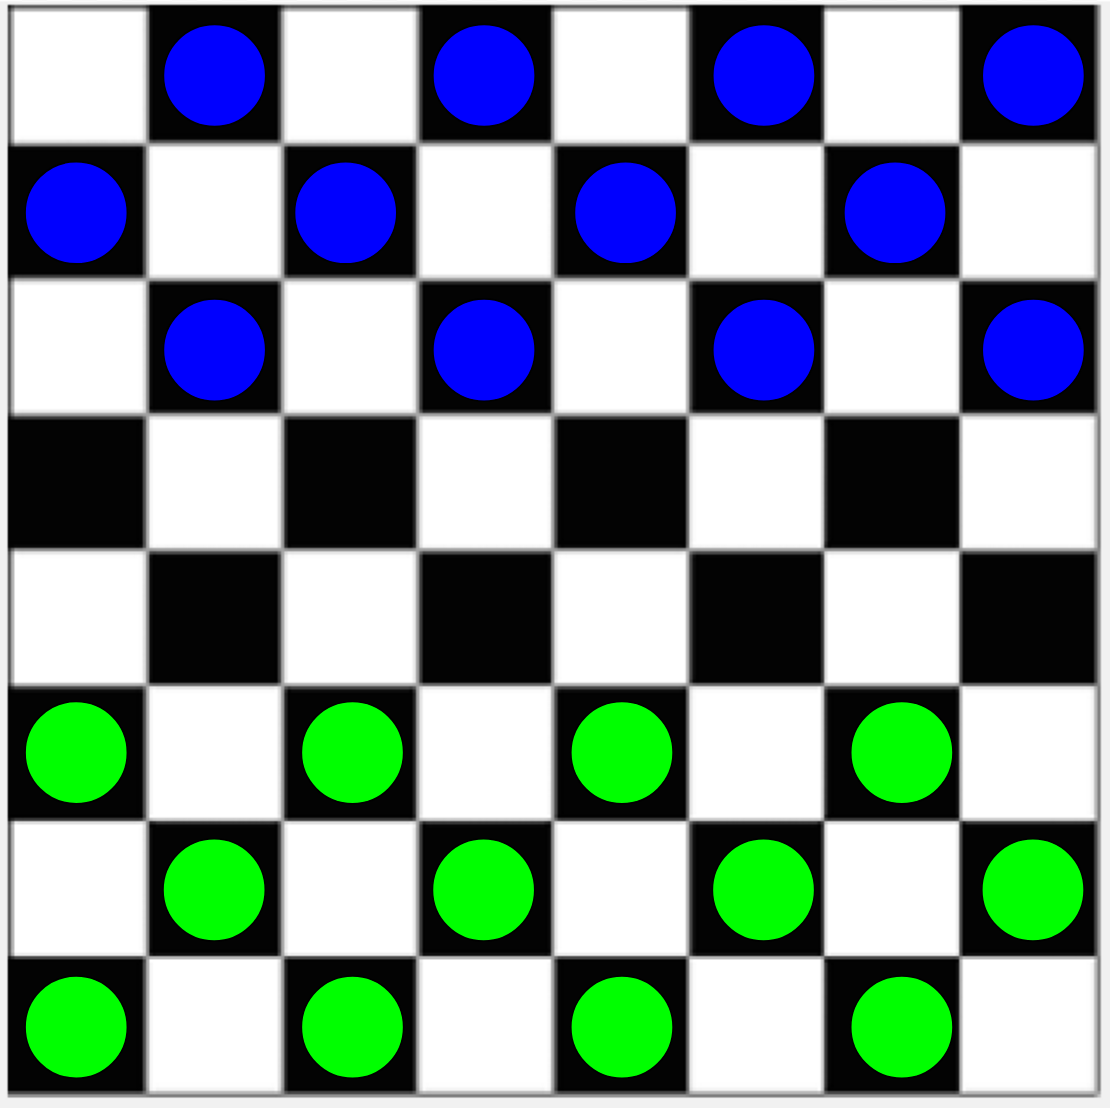 checkers game example output